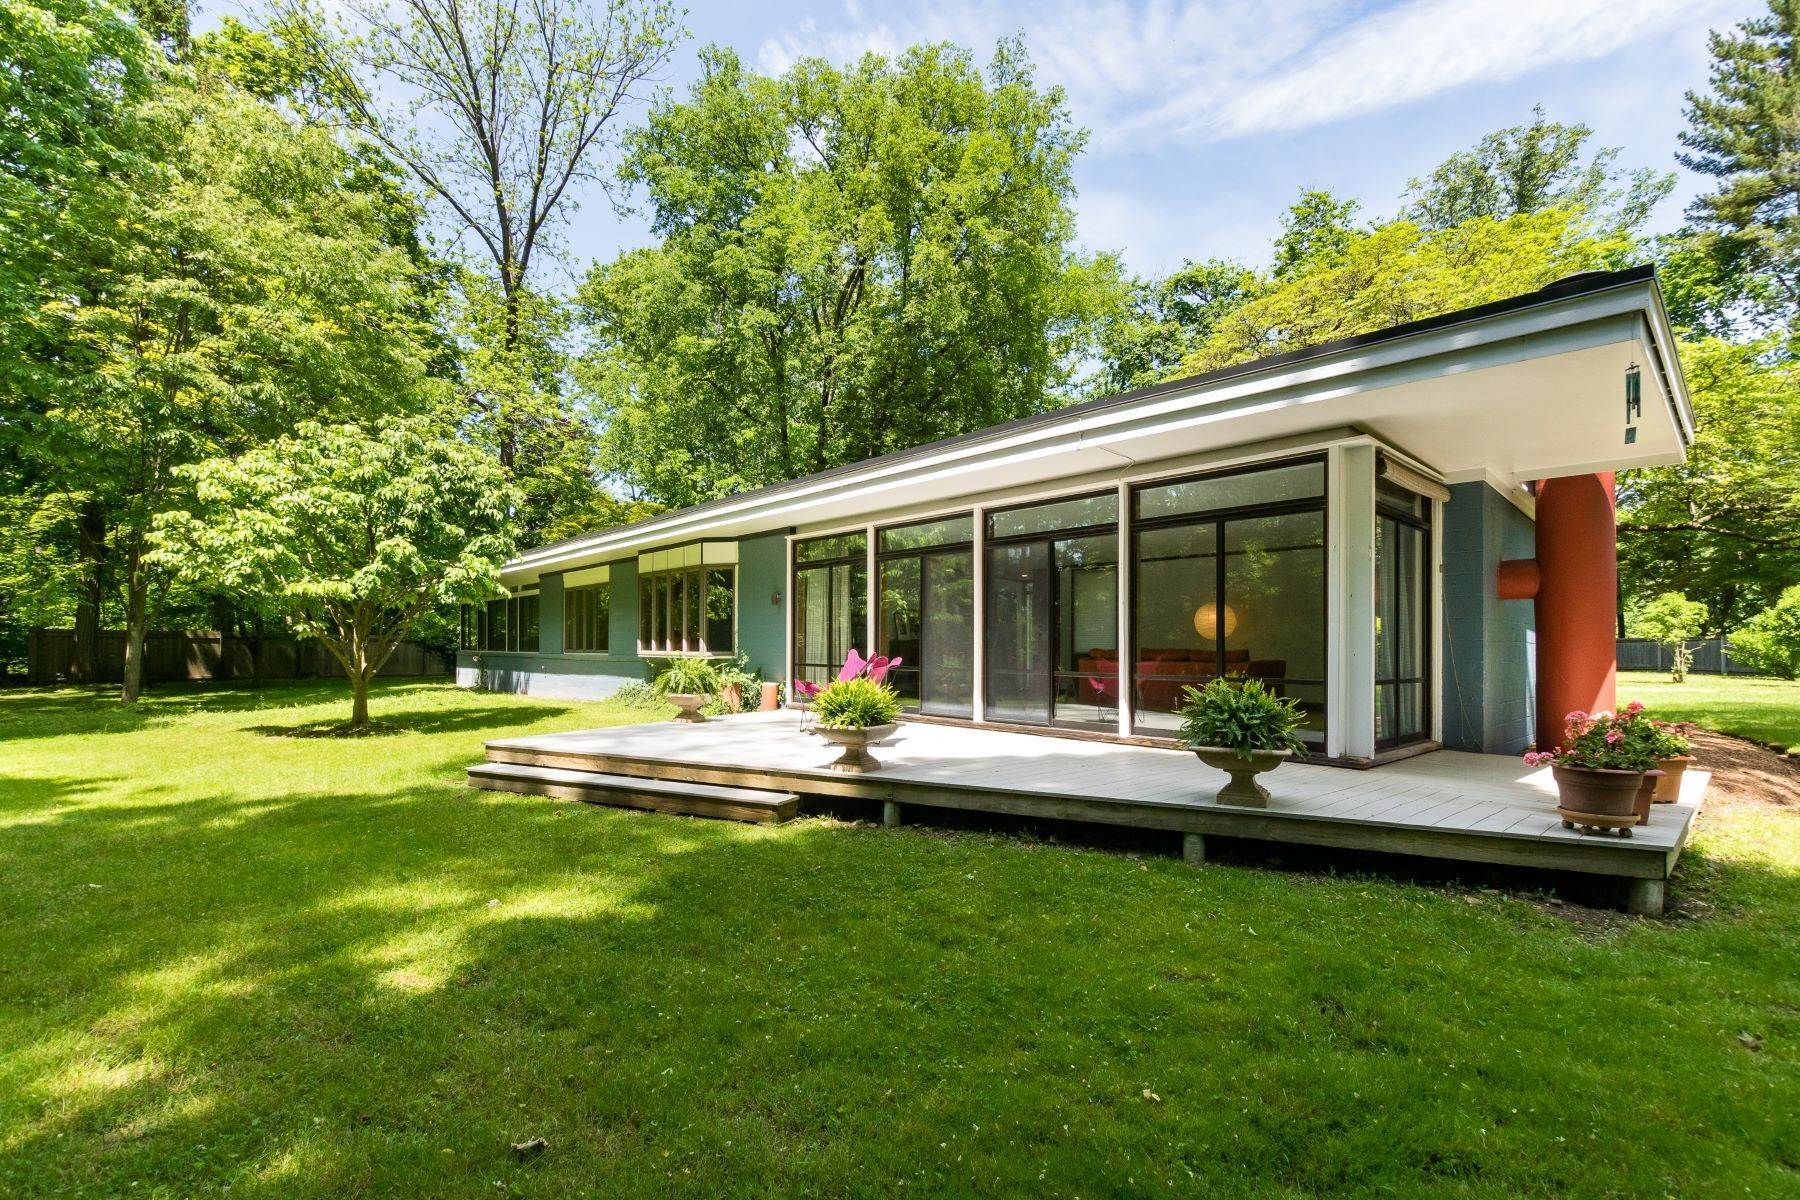 Property for Sale at Light and Space, A Mid-Century Modern Marvel 3472 Lawrenceville Road, Princeton, New Jersey 08540 United States